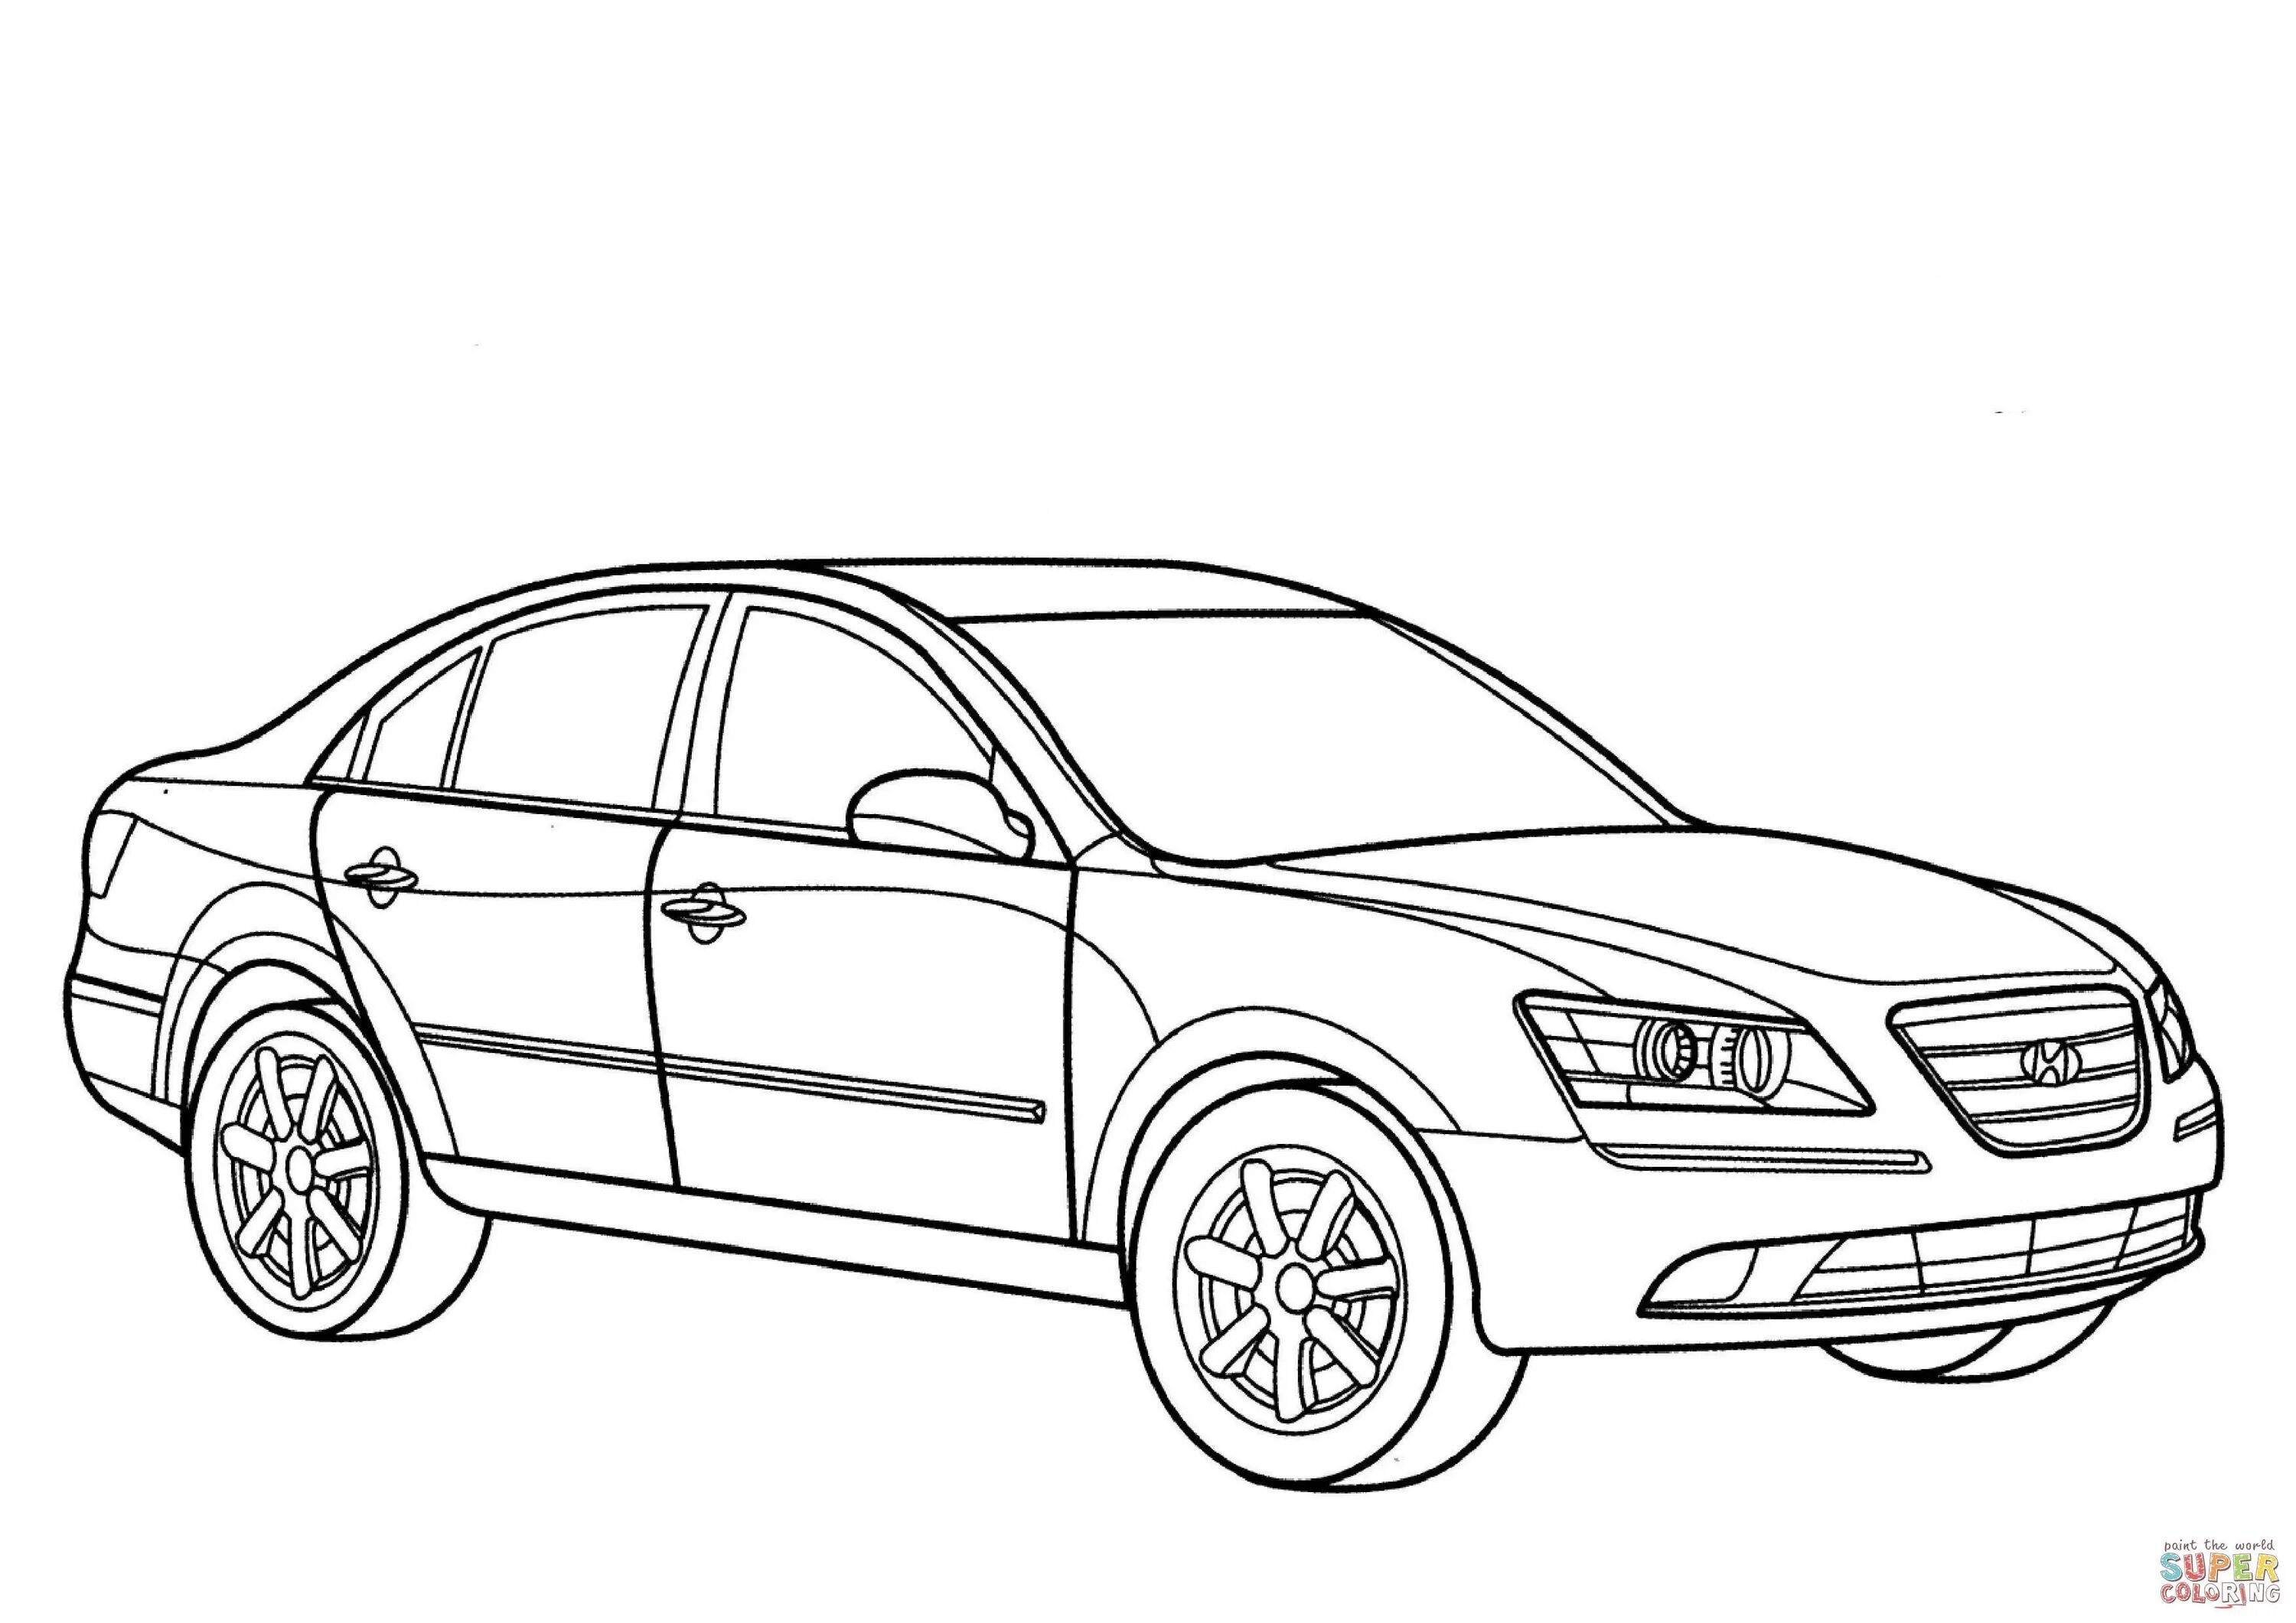 Beautiful car coloring page for kids